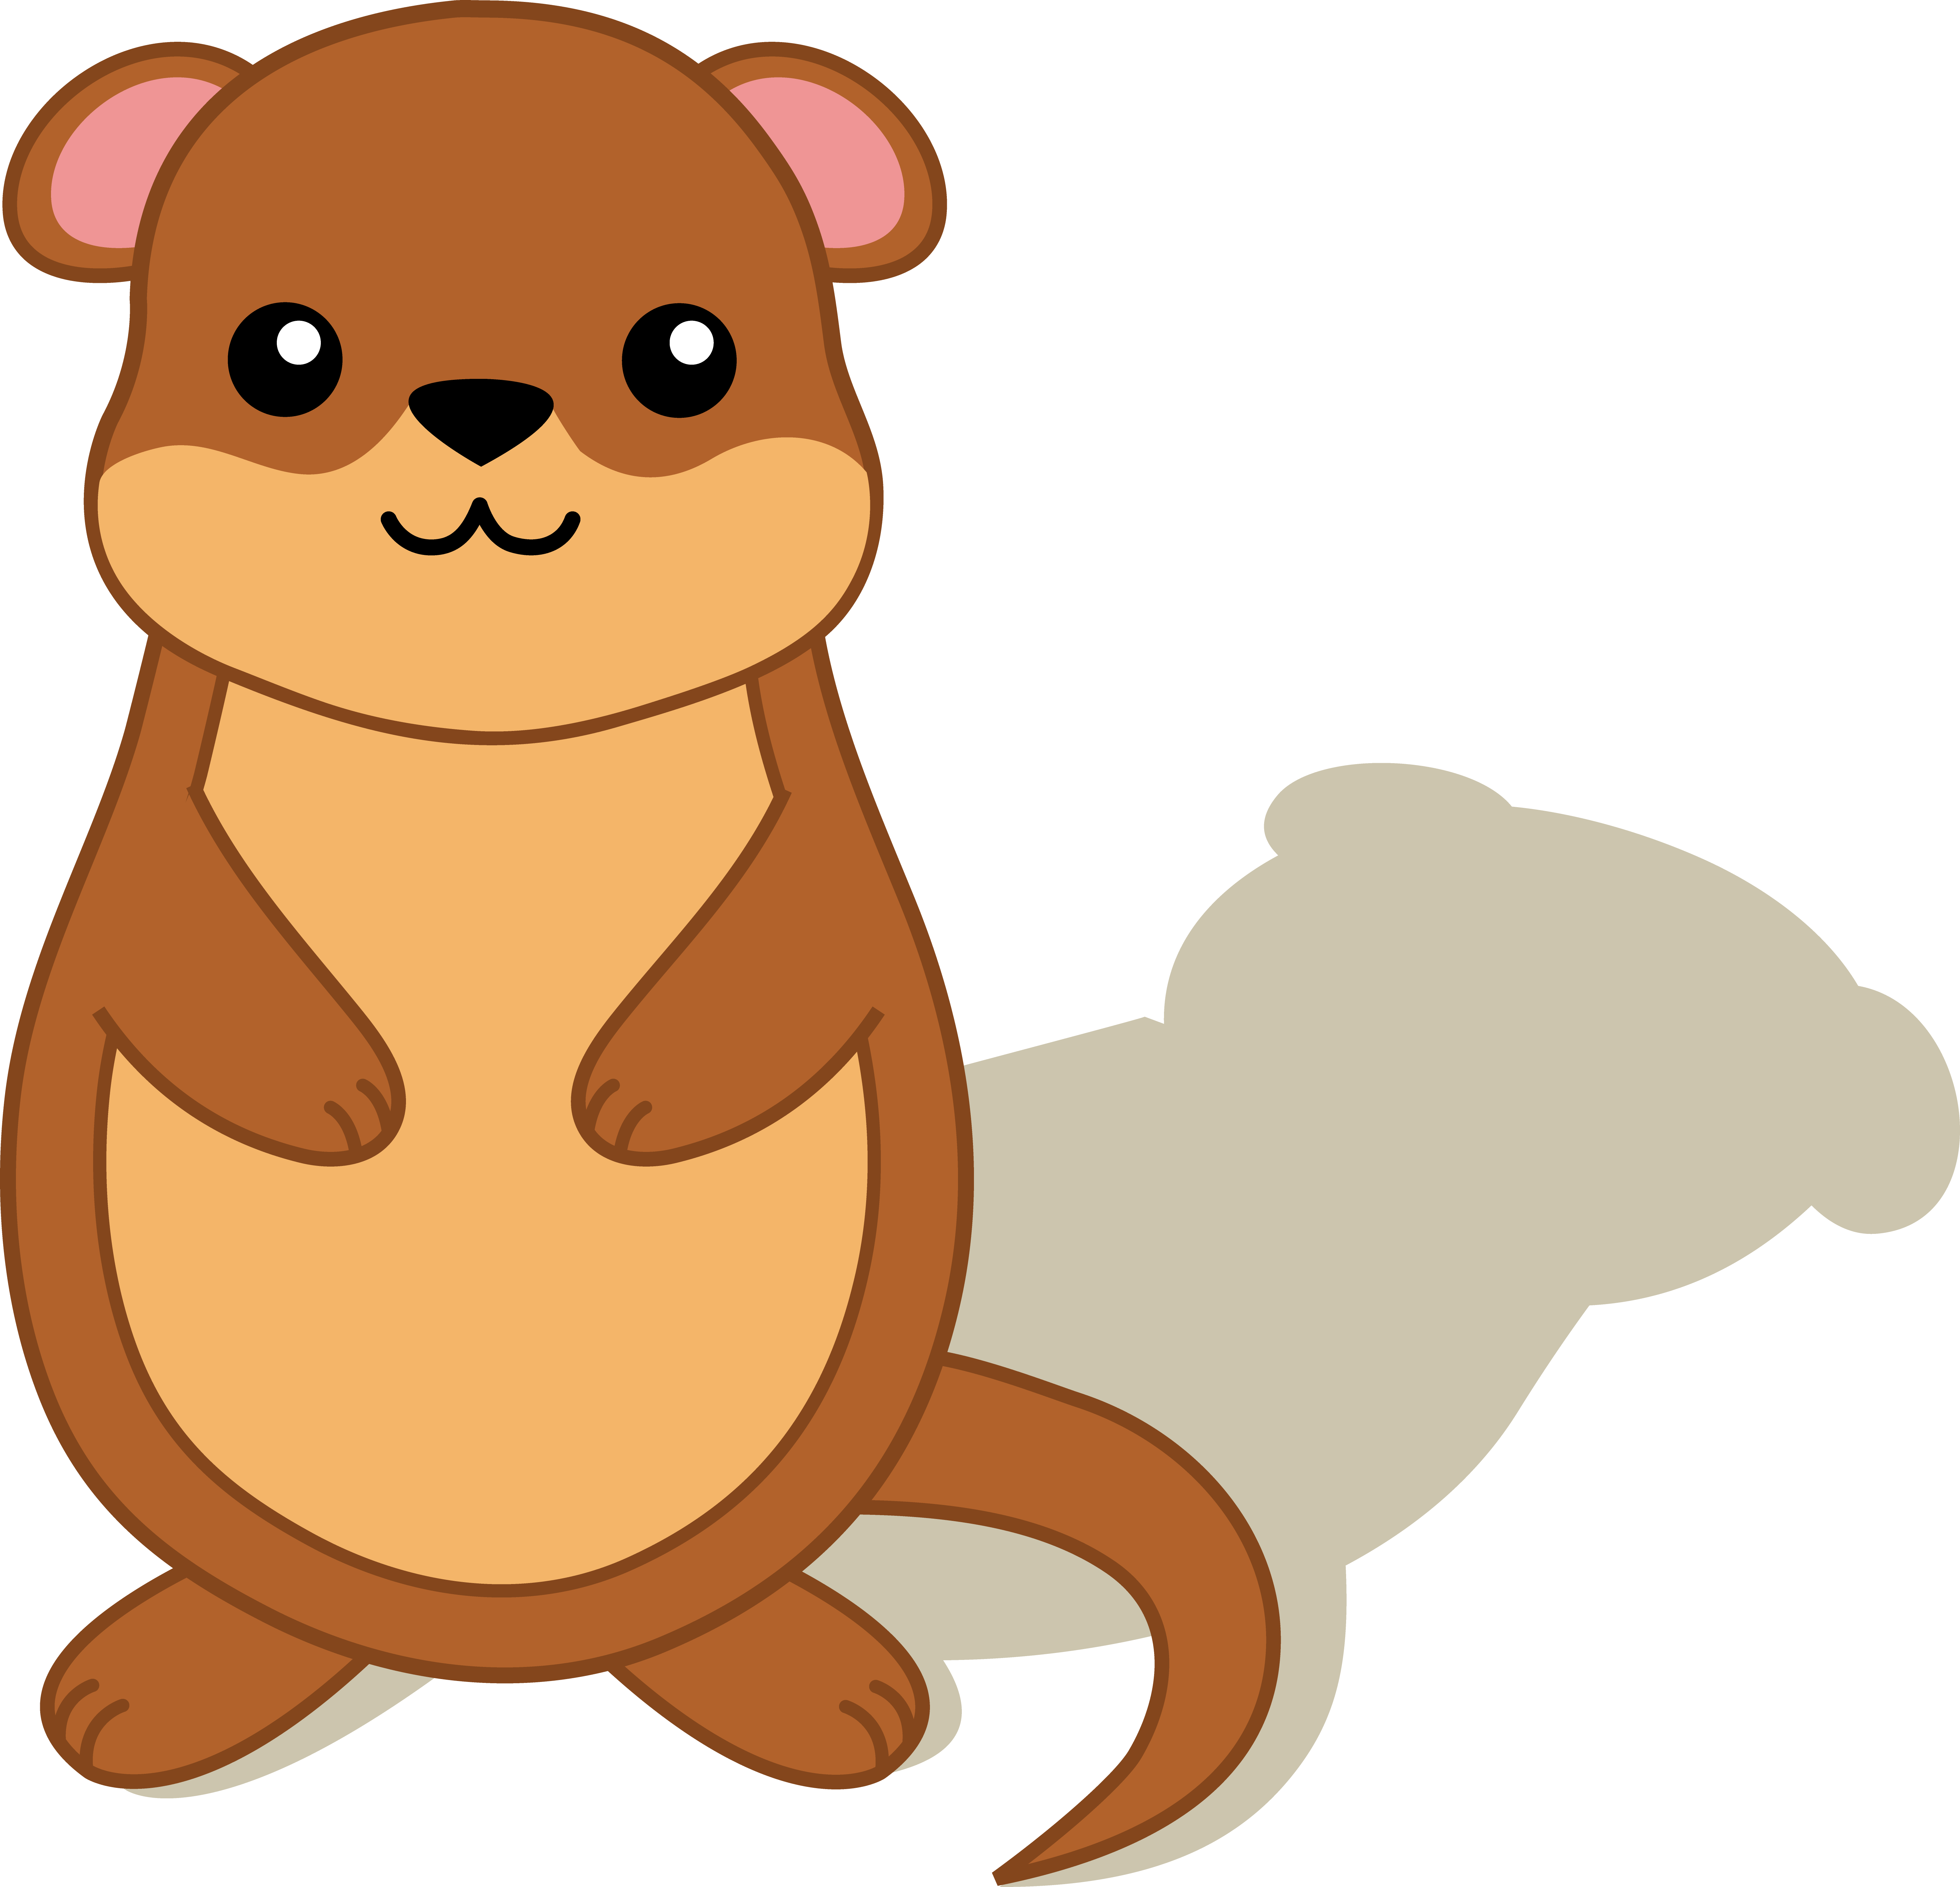 Free Groundhog Cliparts, Download Free Groundhog Cliparts png images